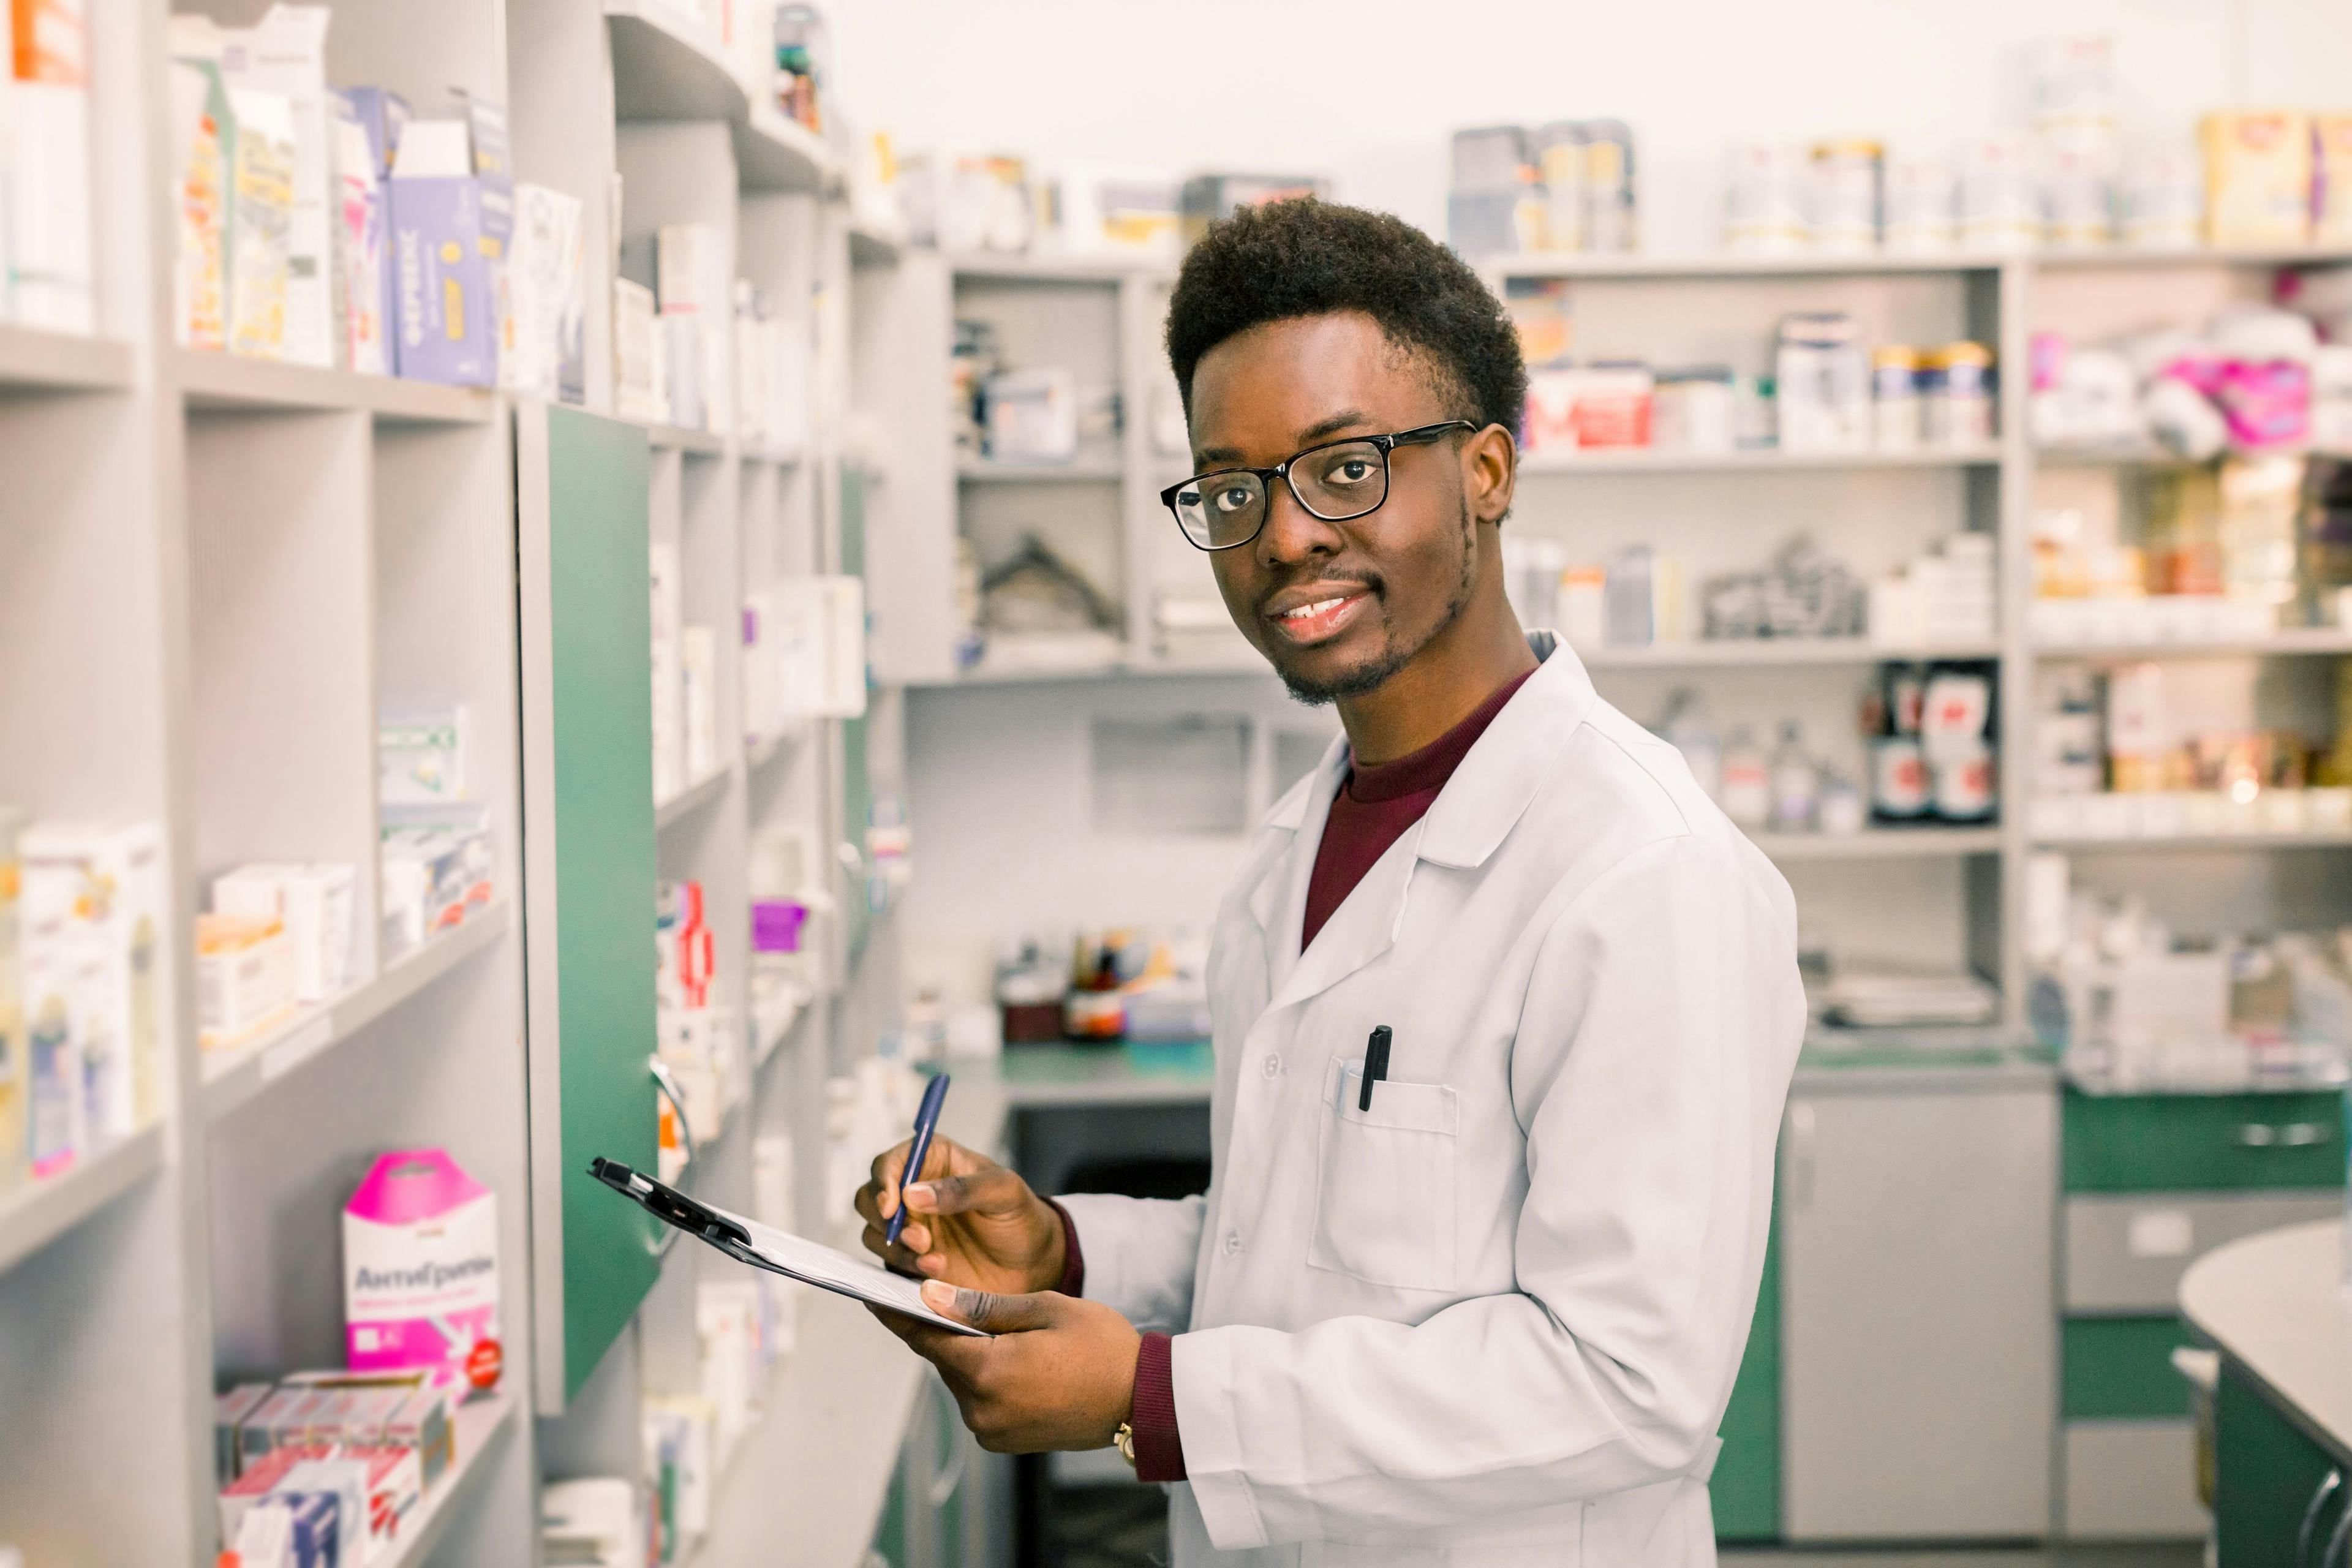 Good for Business: PTCB Launches Series Highlighting Employers Investing in Pharmacy Technicians